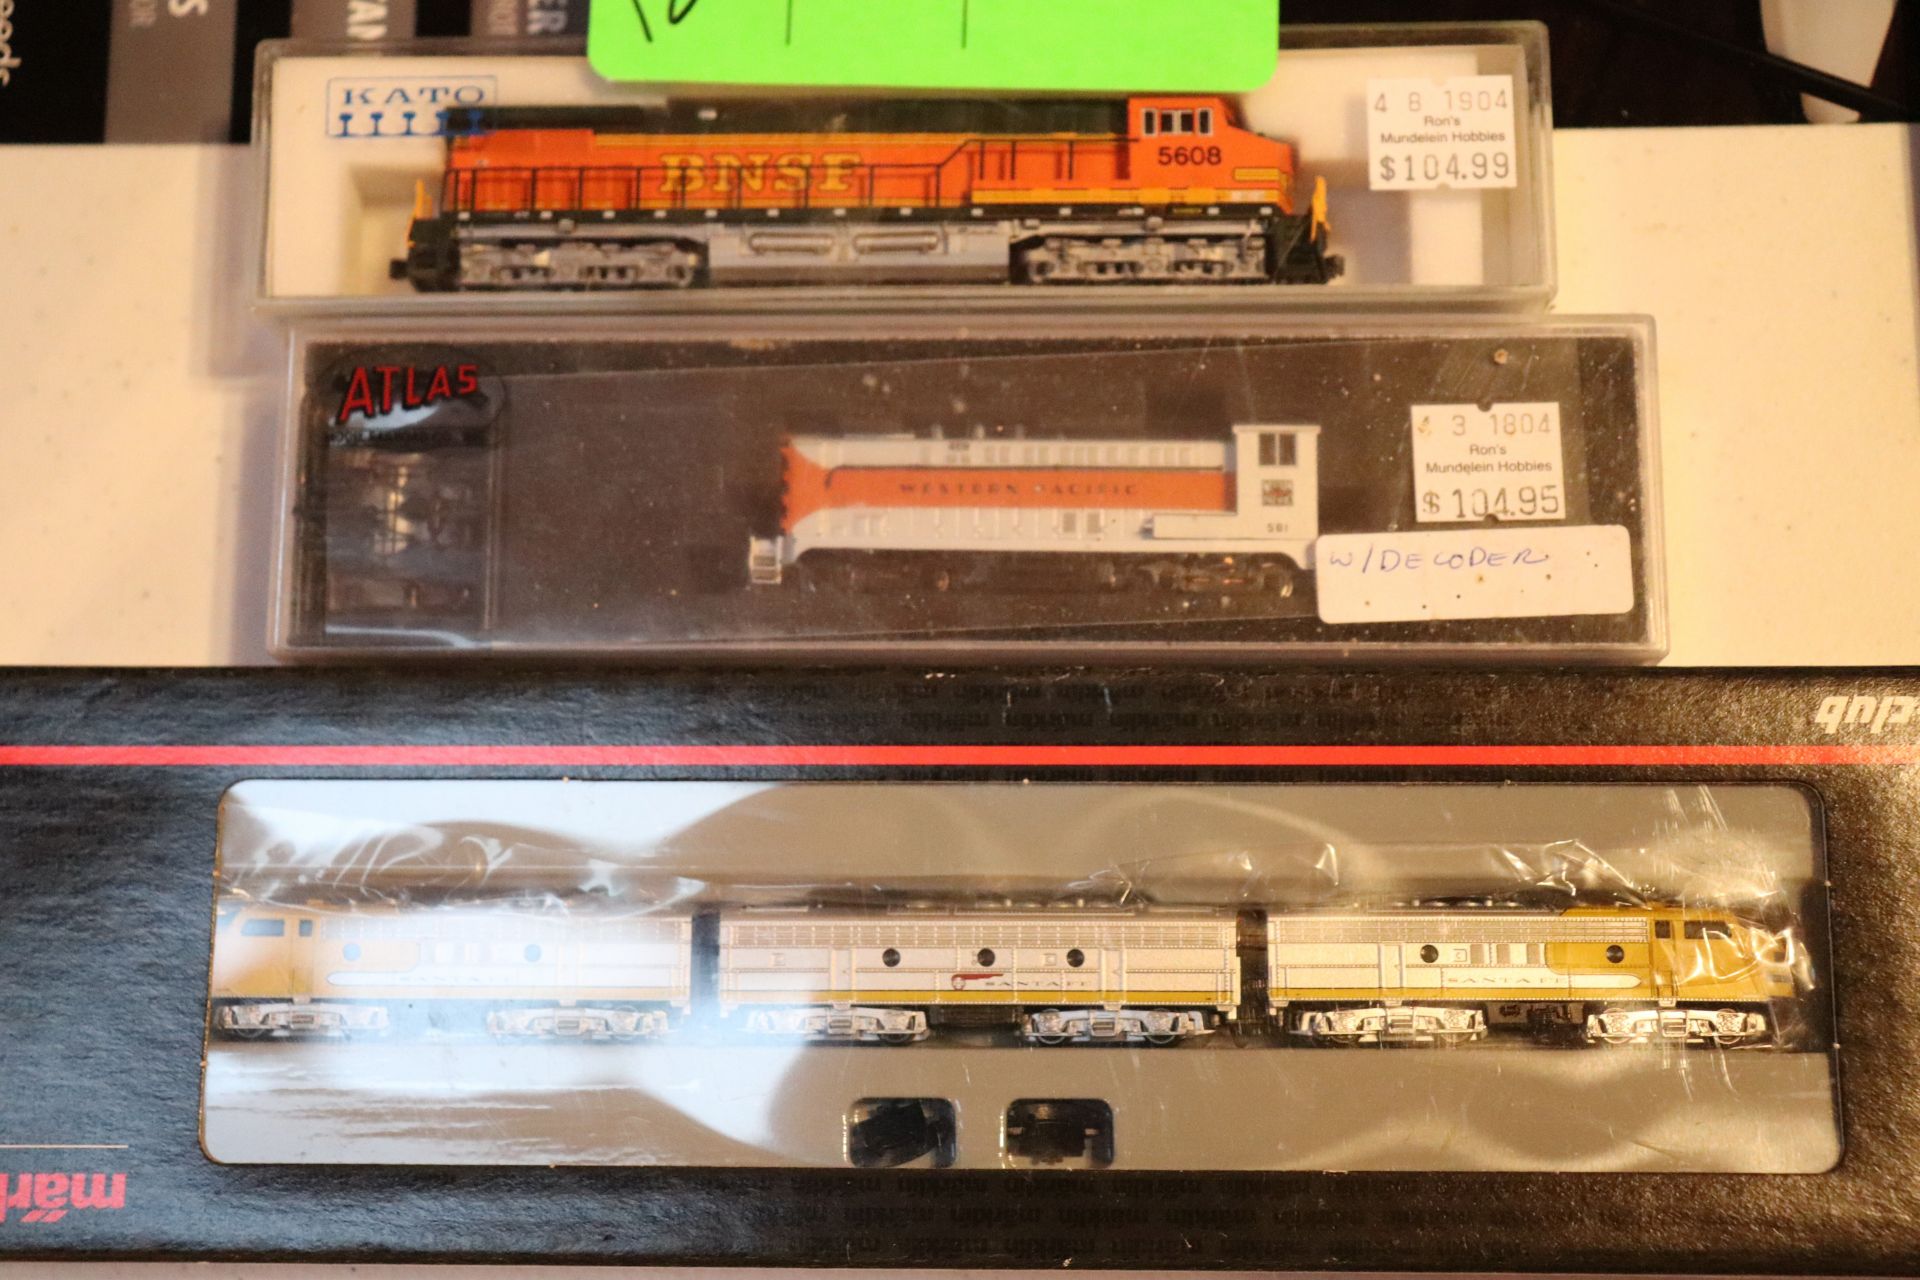 Three new train toys including a Kato Gull Wing Cab locomotive, Atlas N scale V0-1000 locomotive, an